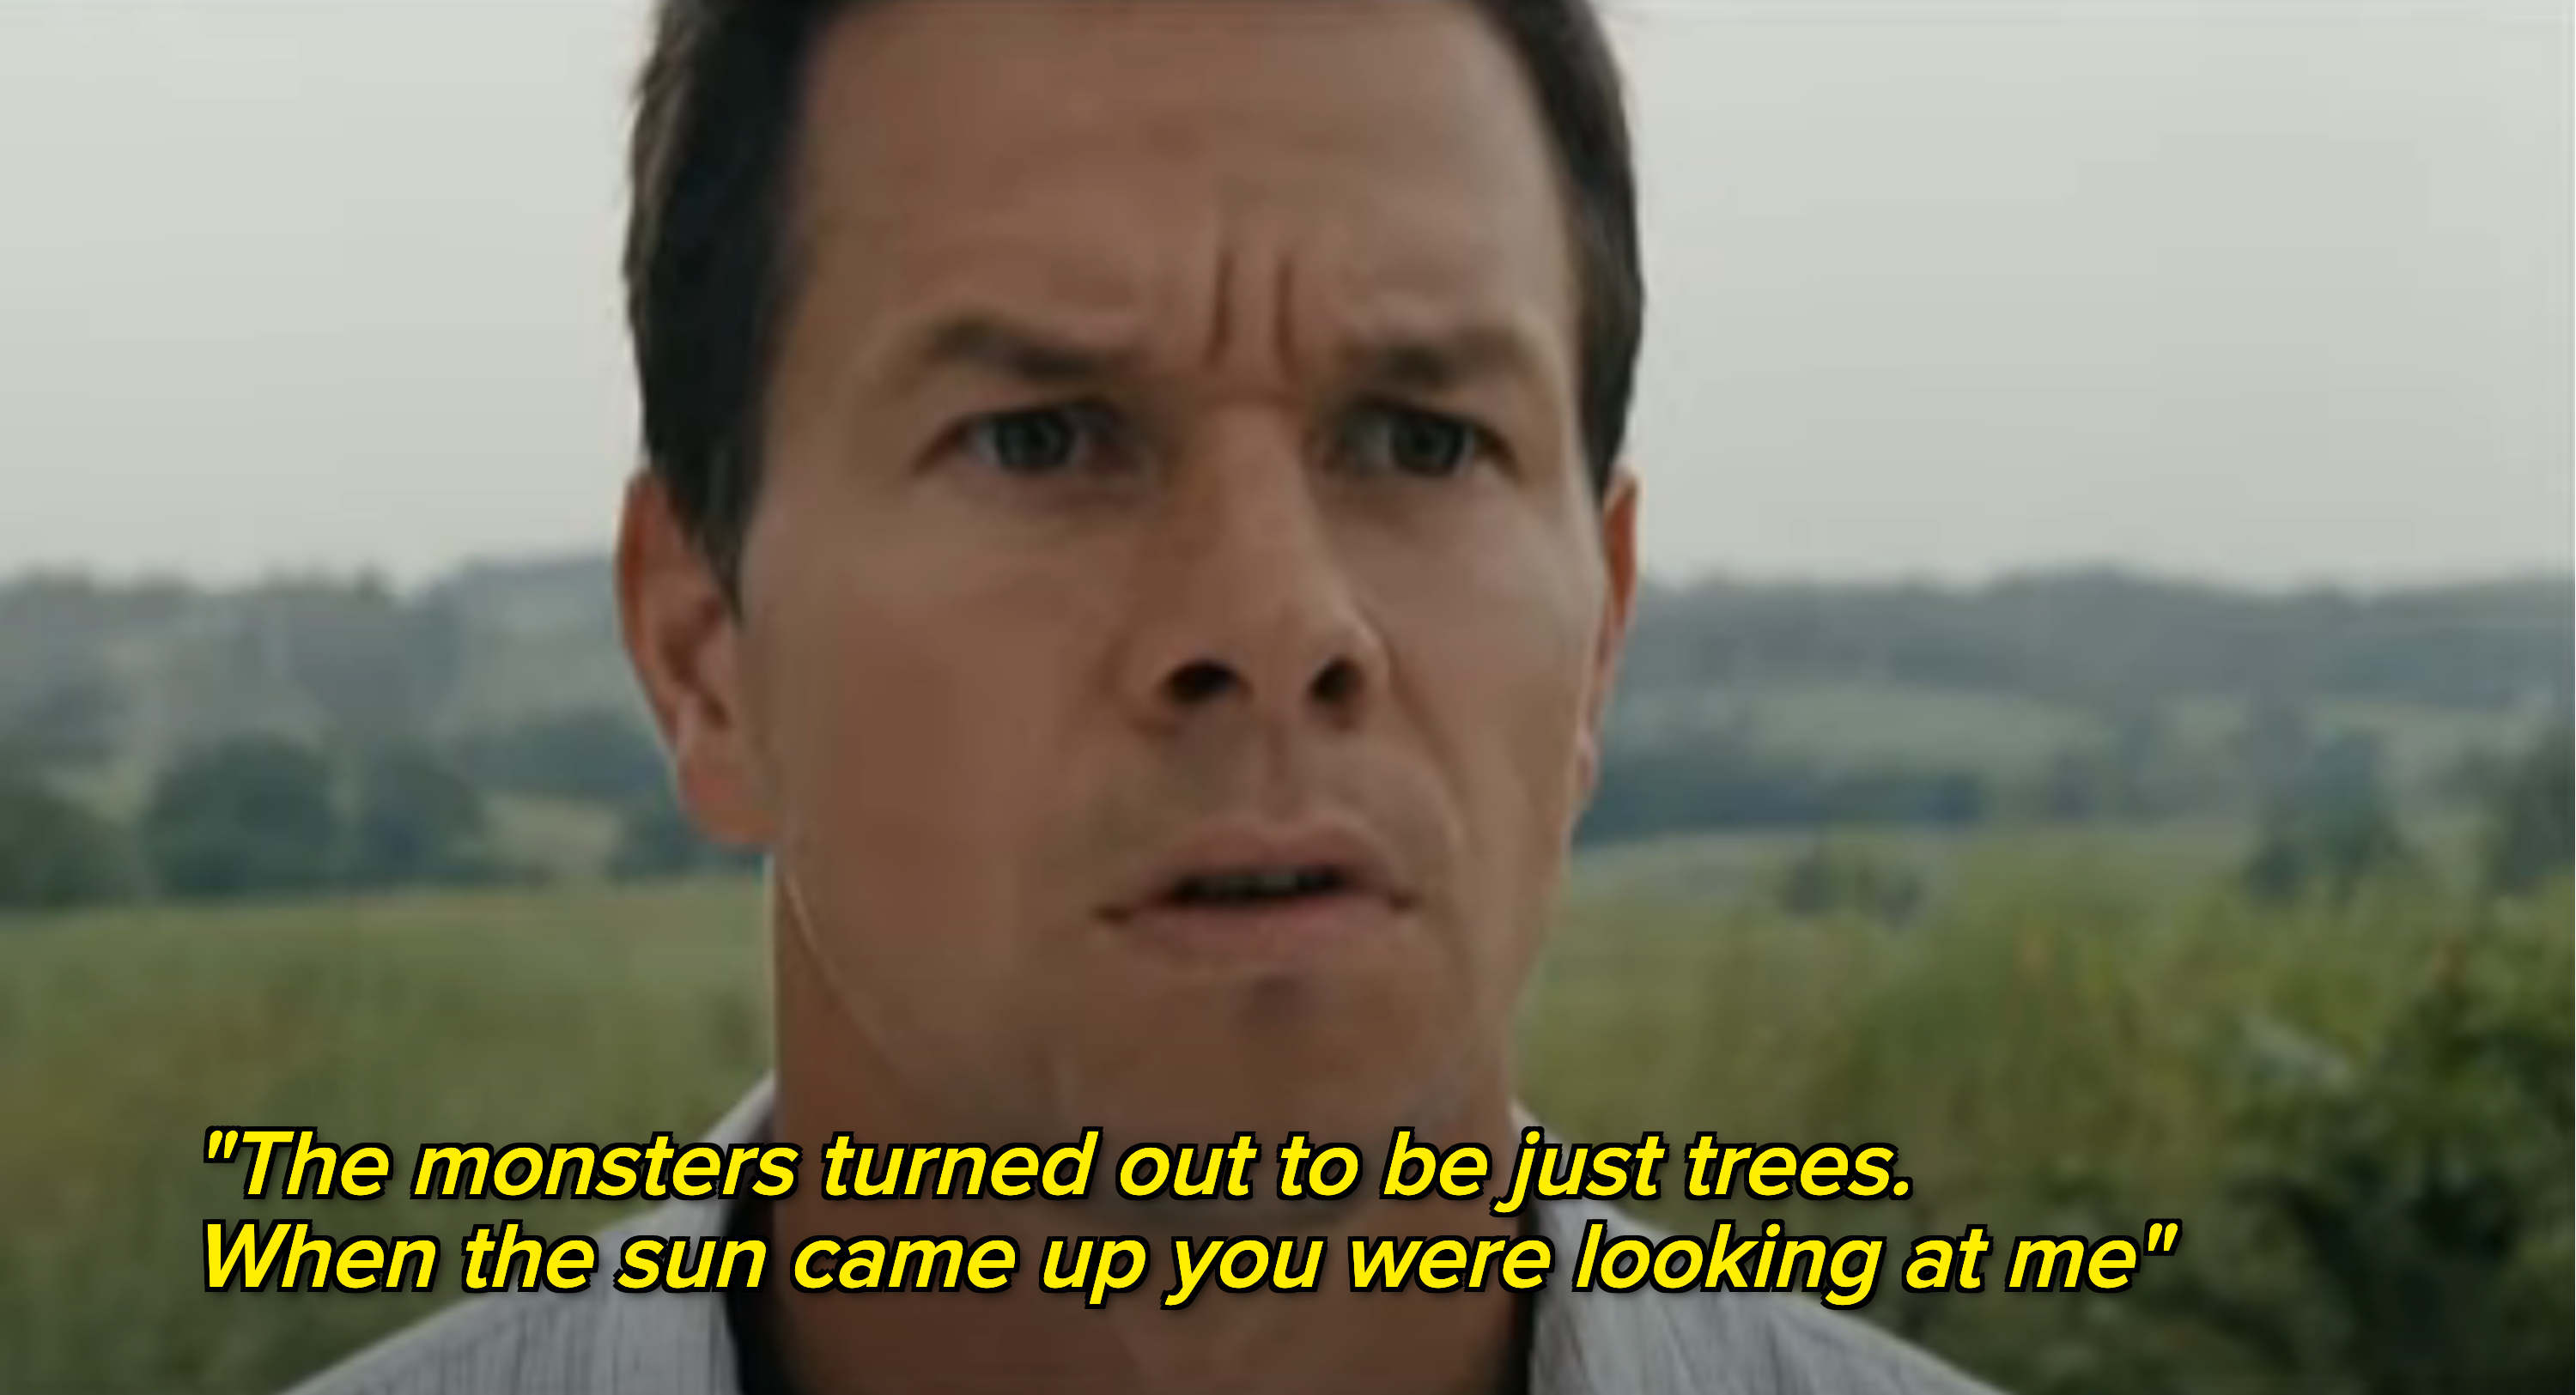 mark walberg in the happening with taylor swift lyrics &quot;The monsters turned out to be just trees.  When the sun came up you were looking at me&quot;